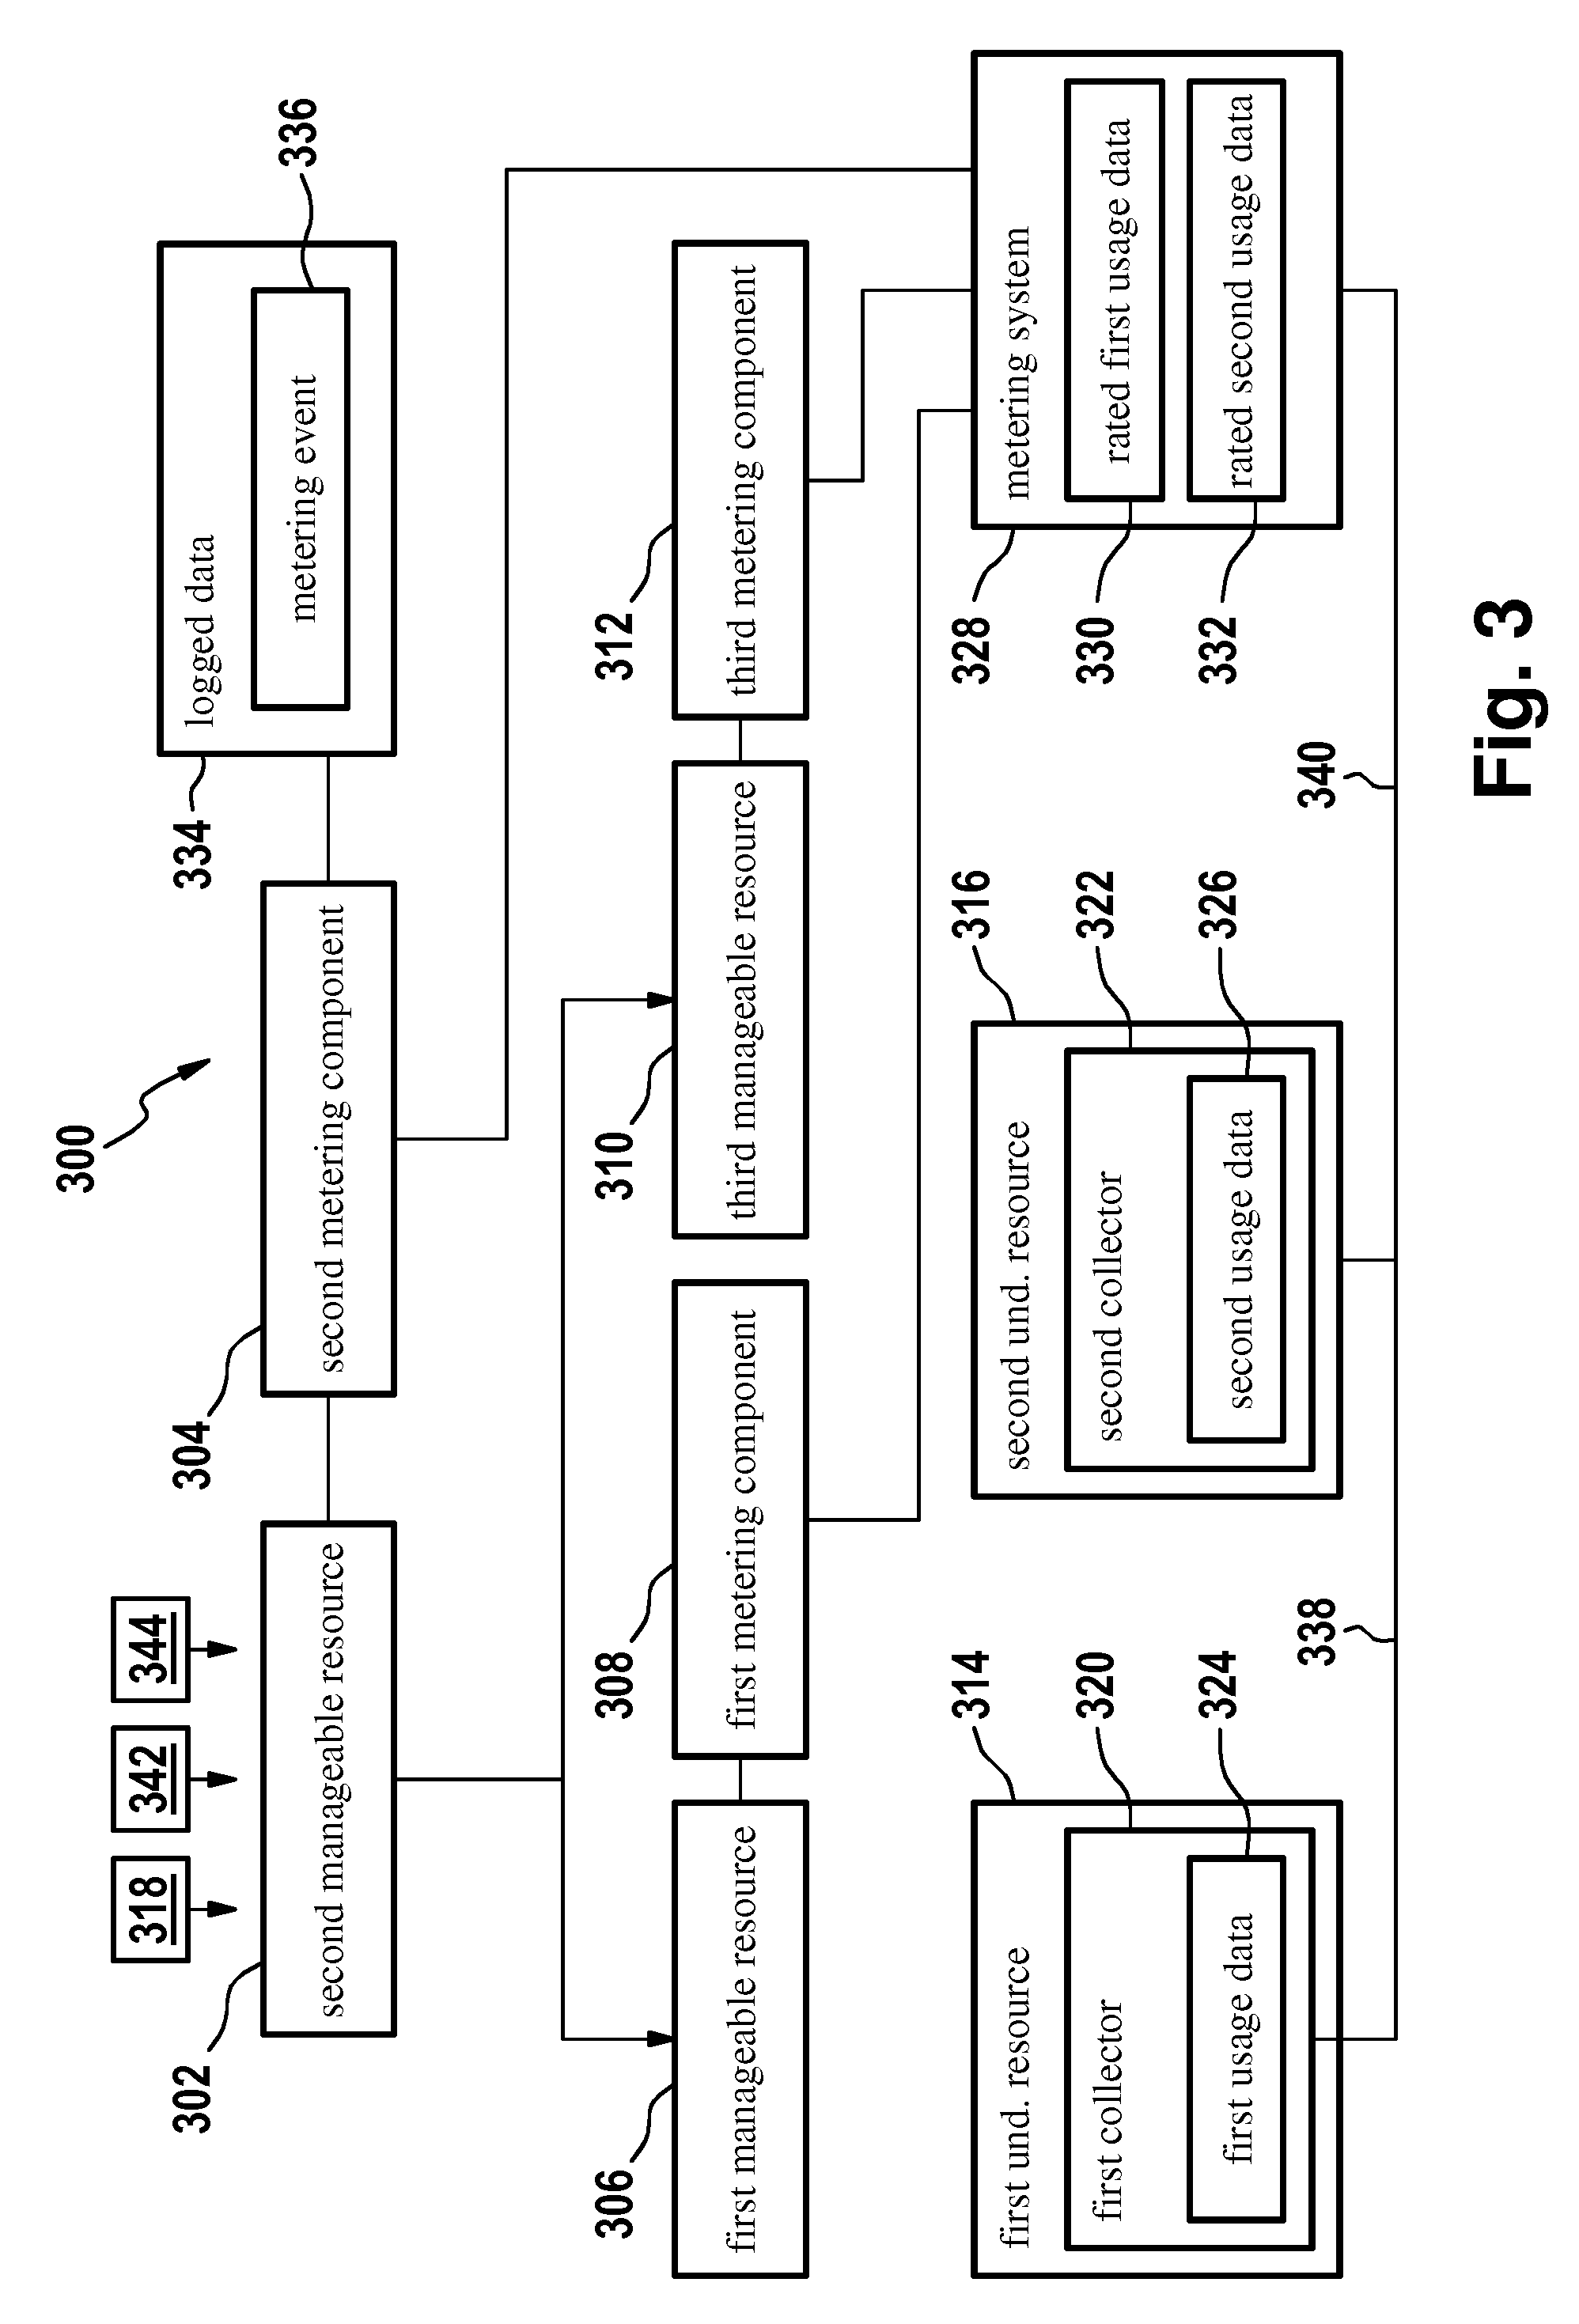 Method and data processing system for collecting usage data of an on-demand service